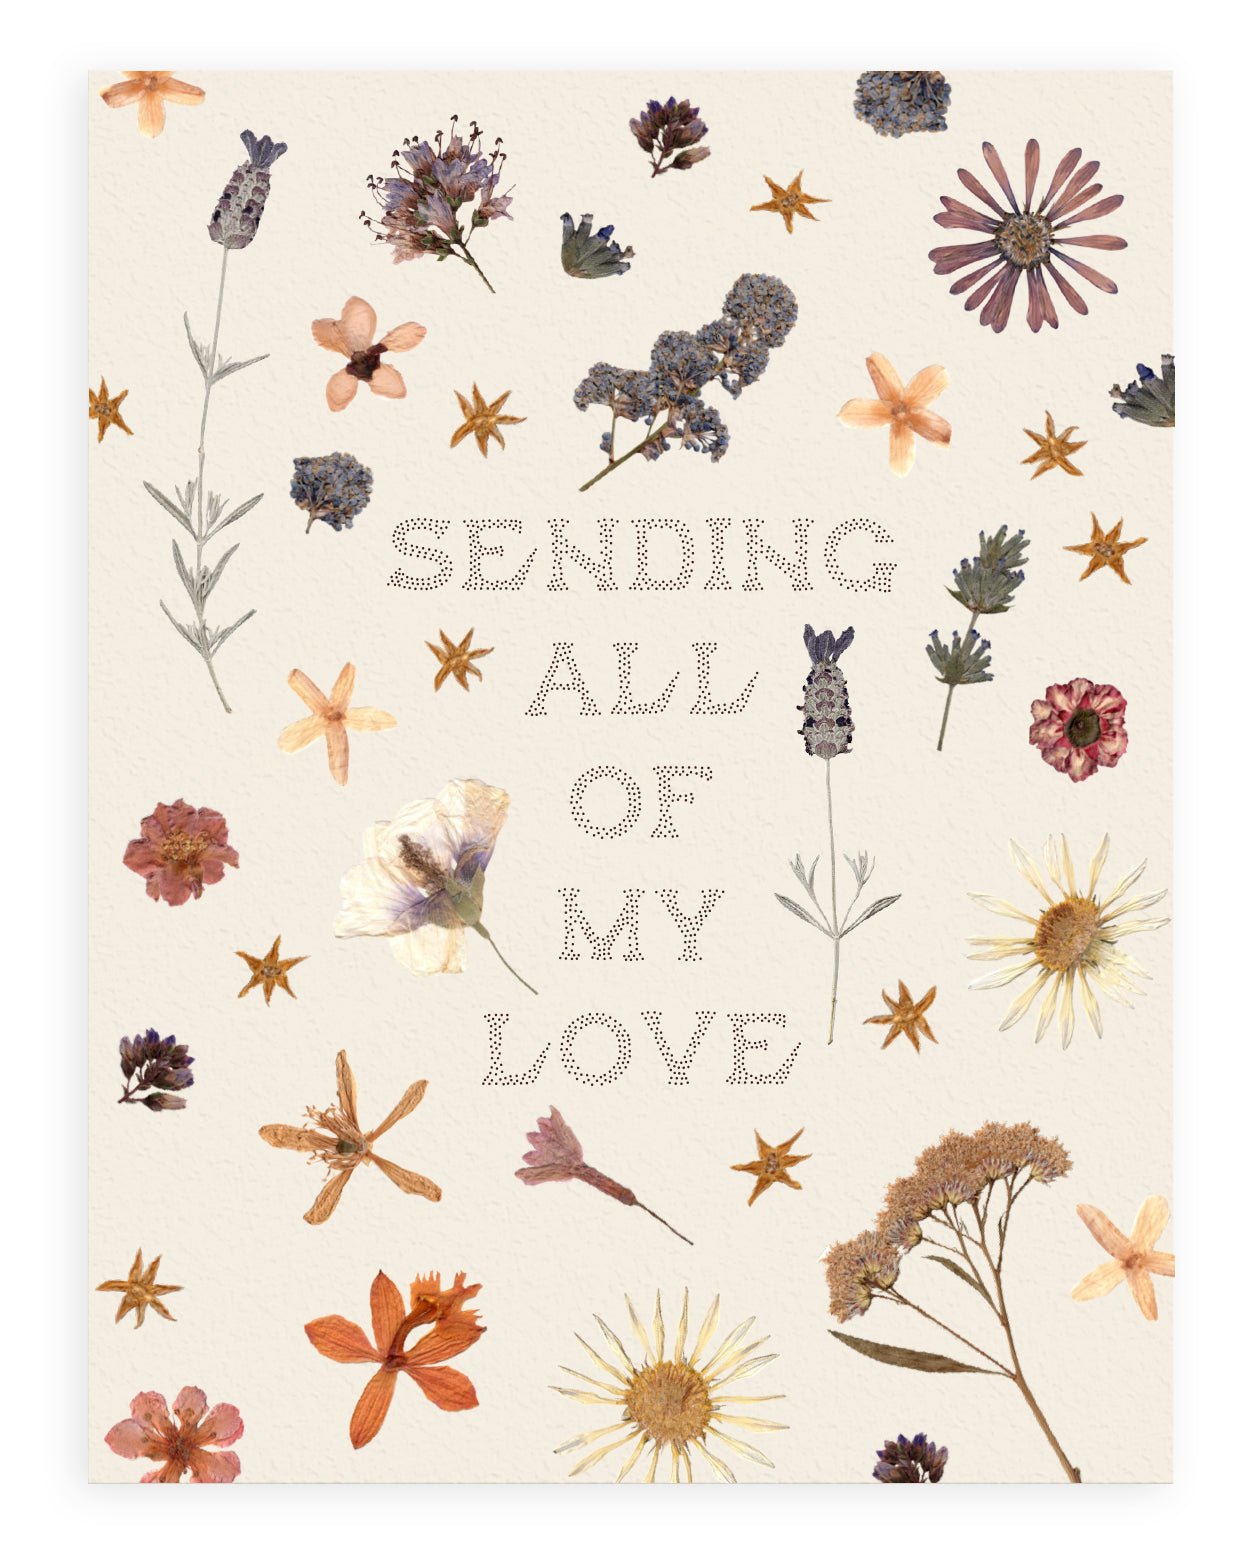 "Sending All Of My Love" pointillism text font design aligned in the center of the cream colored card surrounded by pressed flowers printed on cardstock against a white background.